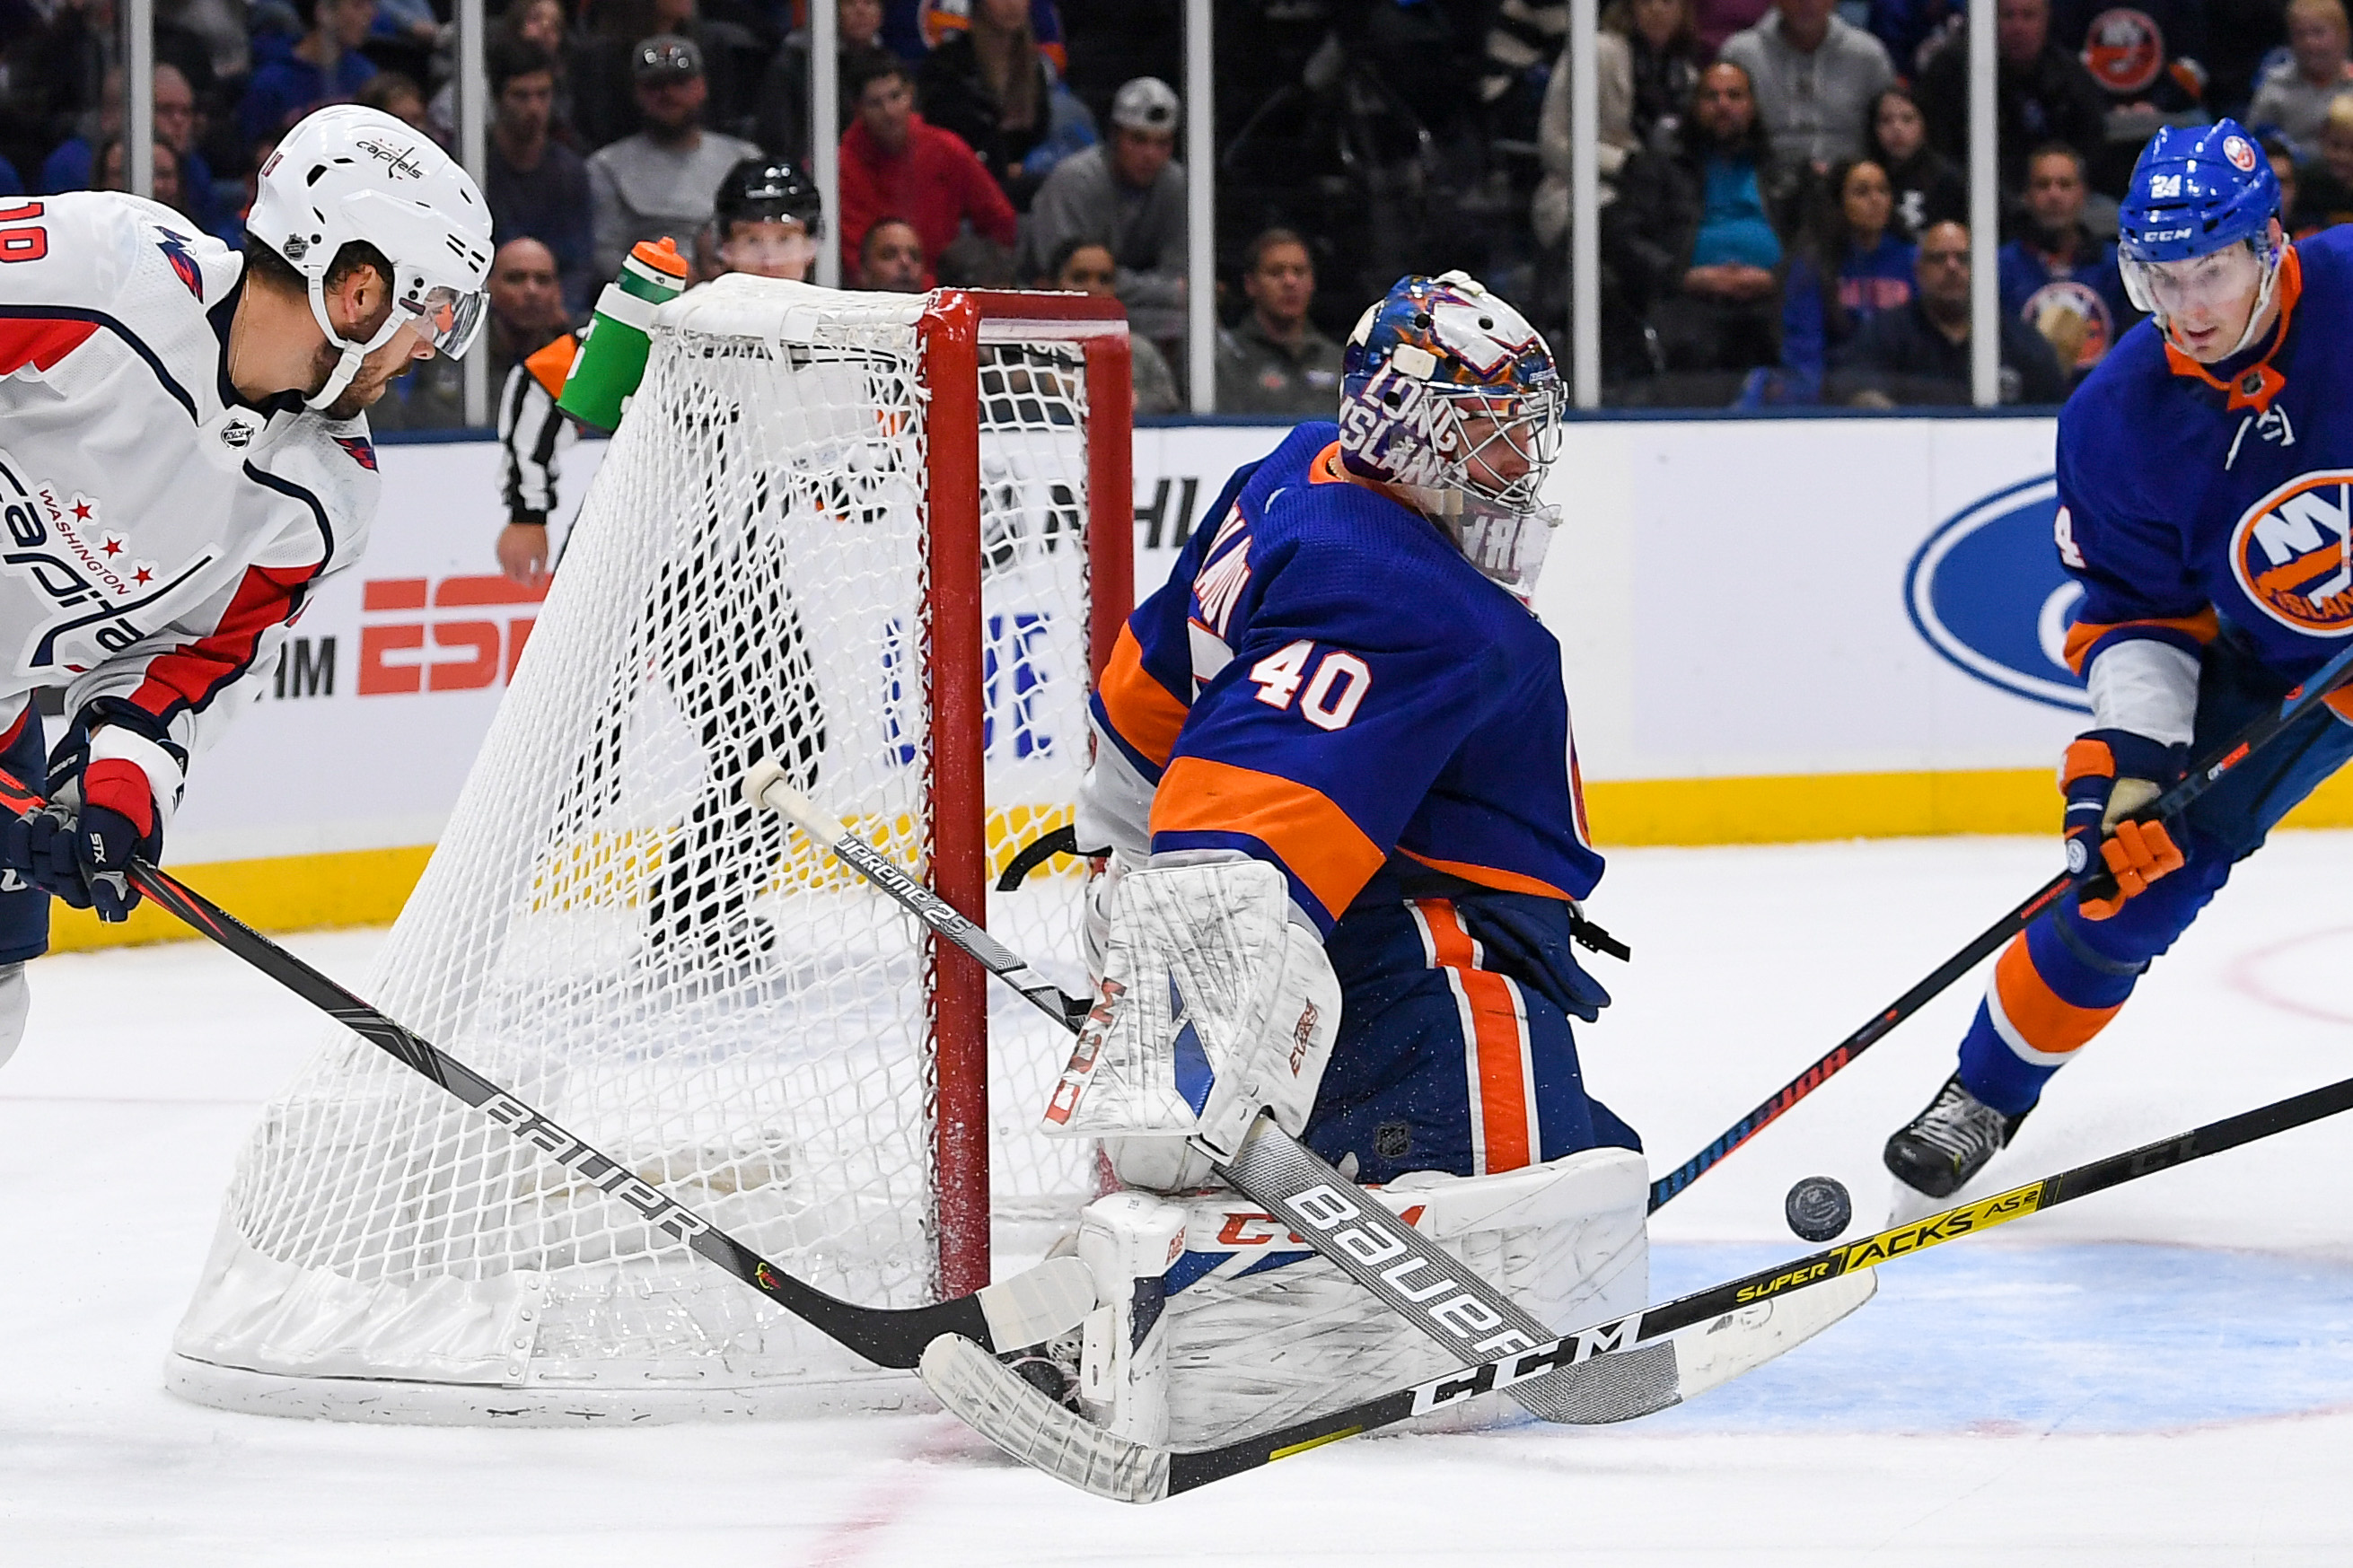 Oct 4, 2019; Uniondale, NY, USA; New York Islanders goaltender Semyon Varlamov (40) makes a save on an attempted wrap around by Washington Capitals center Chandler Stephenson (18) during the third period at Nassau Veterans Memorial Coliseum. Mandatory Credit: Dennis Schneidler-USA TODAY Sports